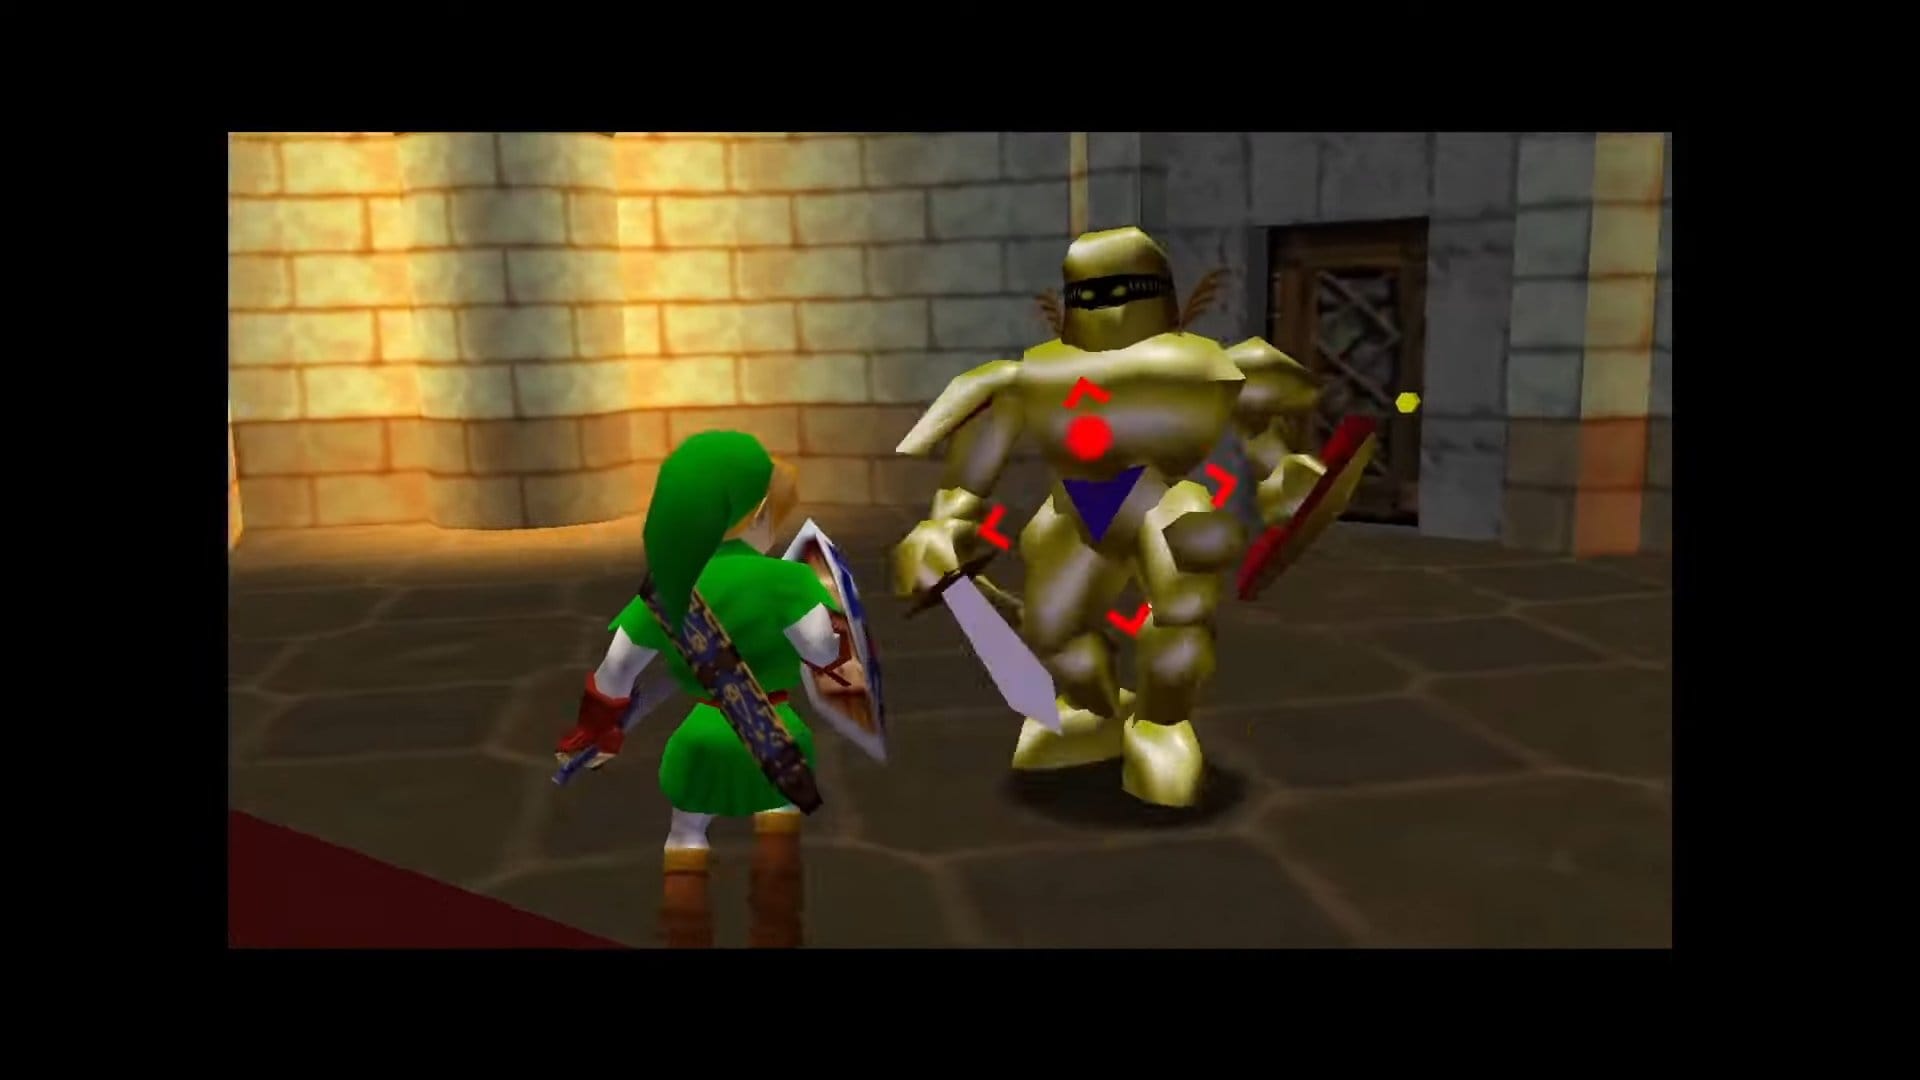 Gallery: Here's how Zelda: Ocarina of Time's unofficial PC port is